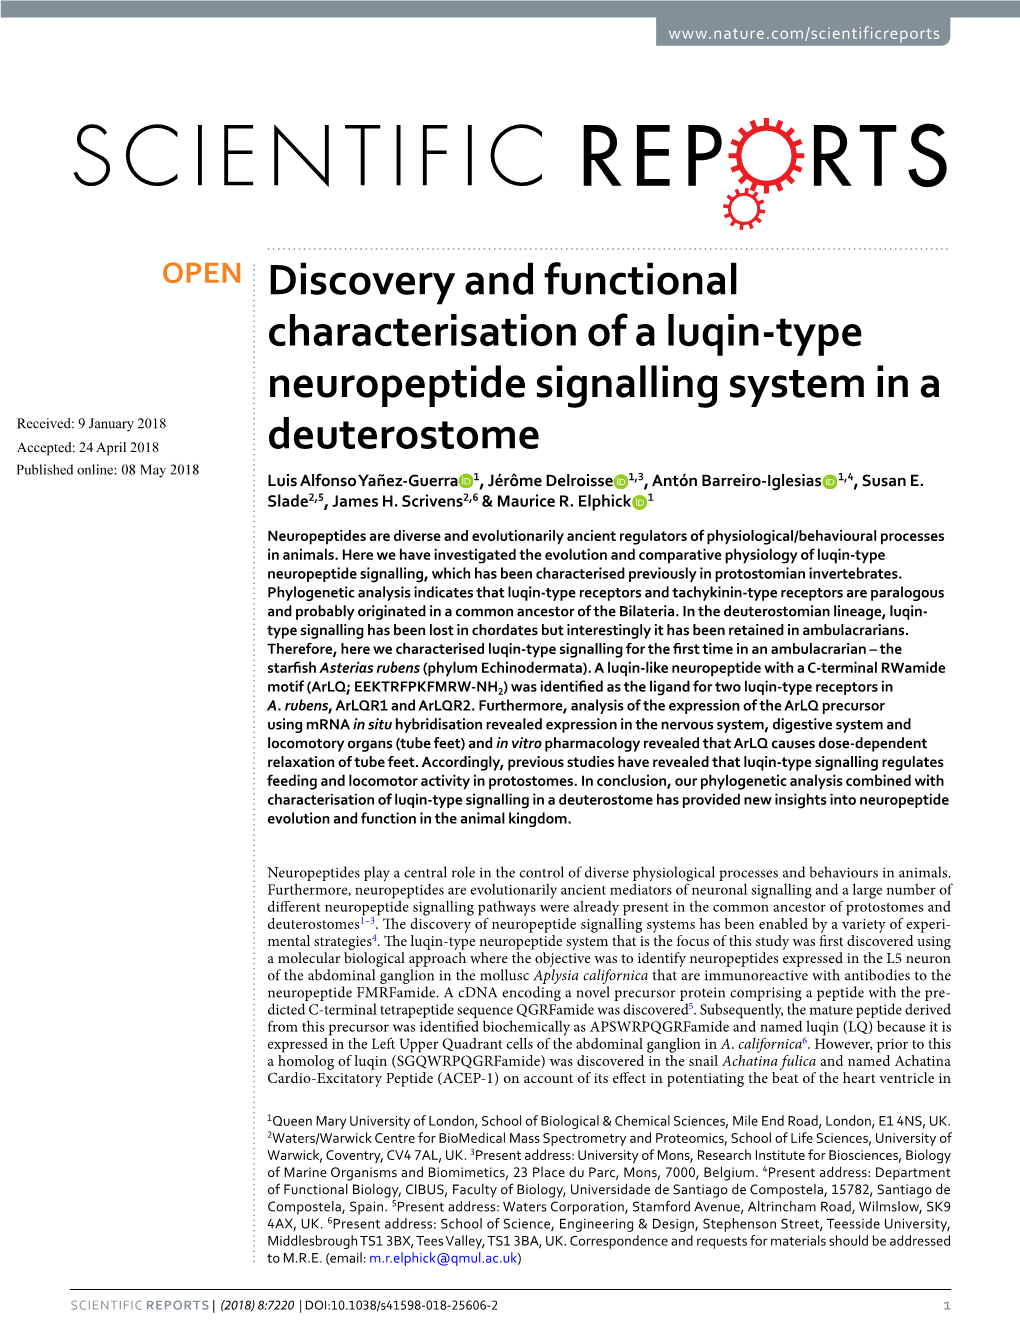 Discovery and Functional Characterisation of a Luqin-Type